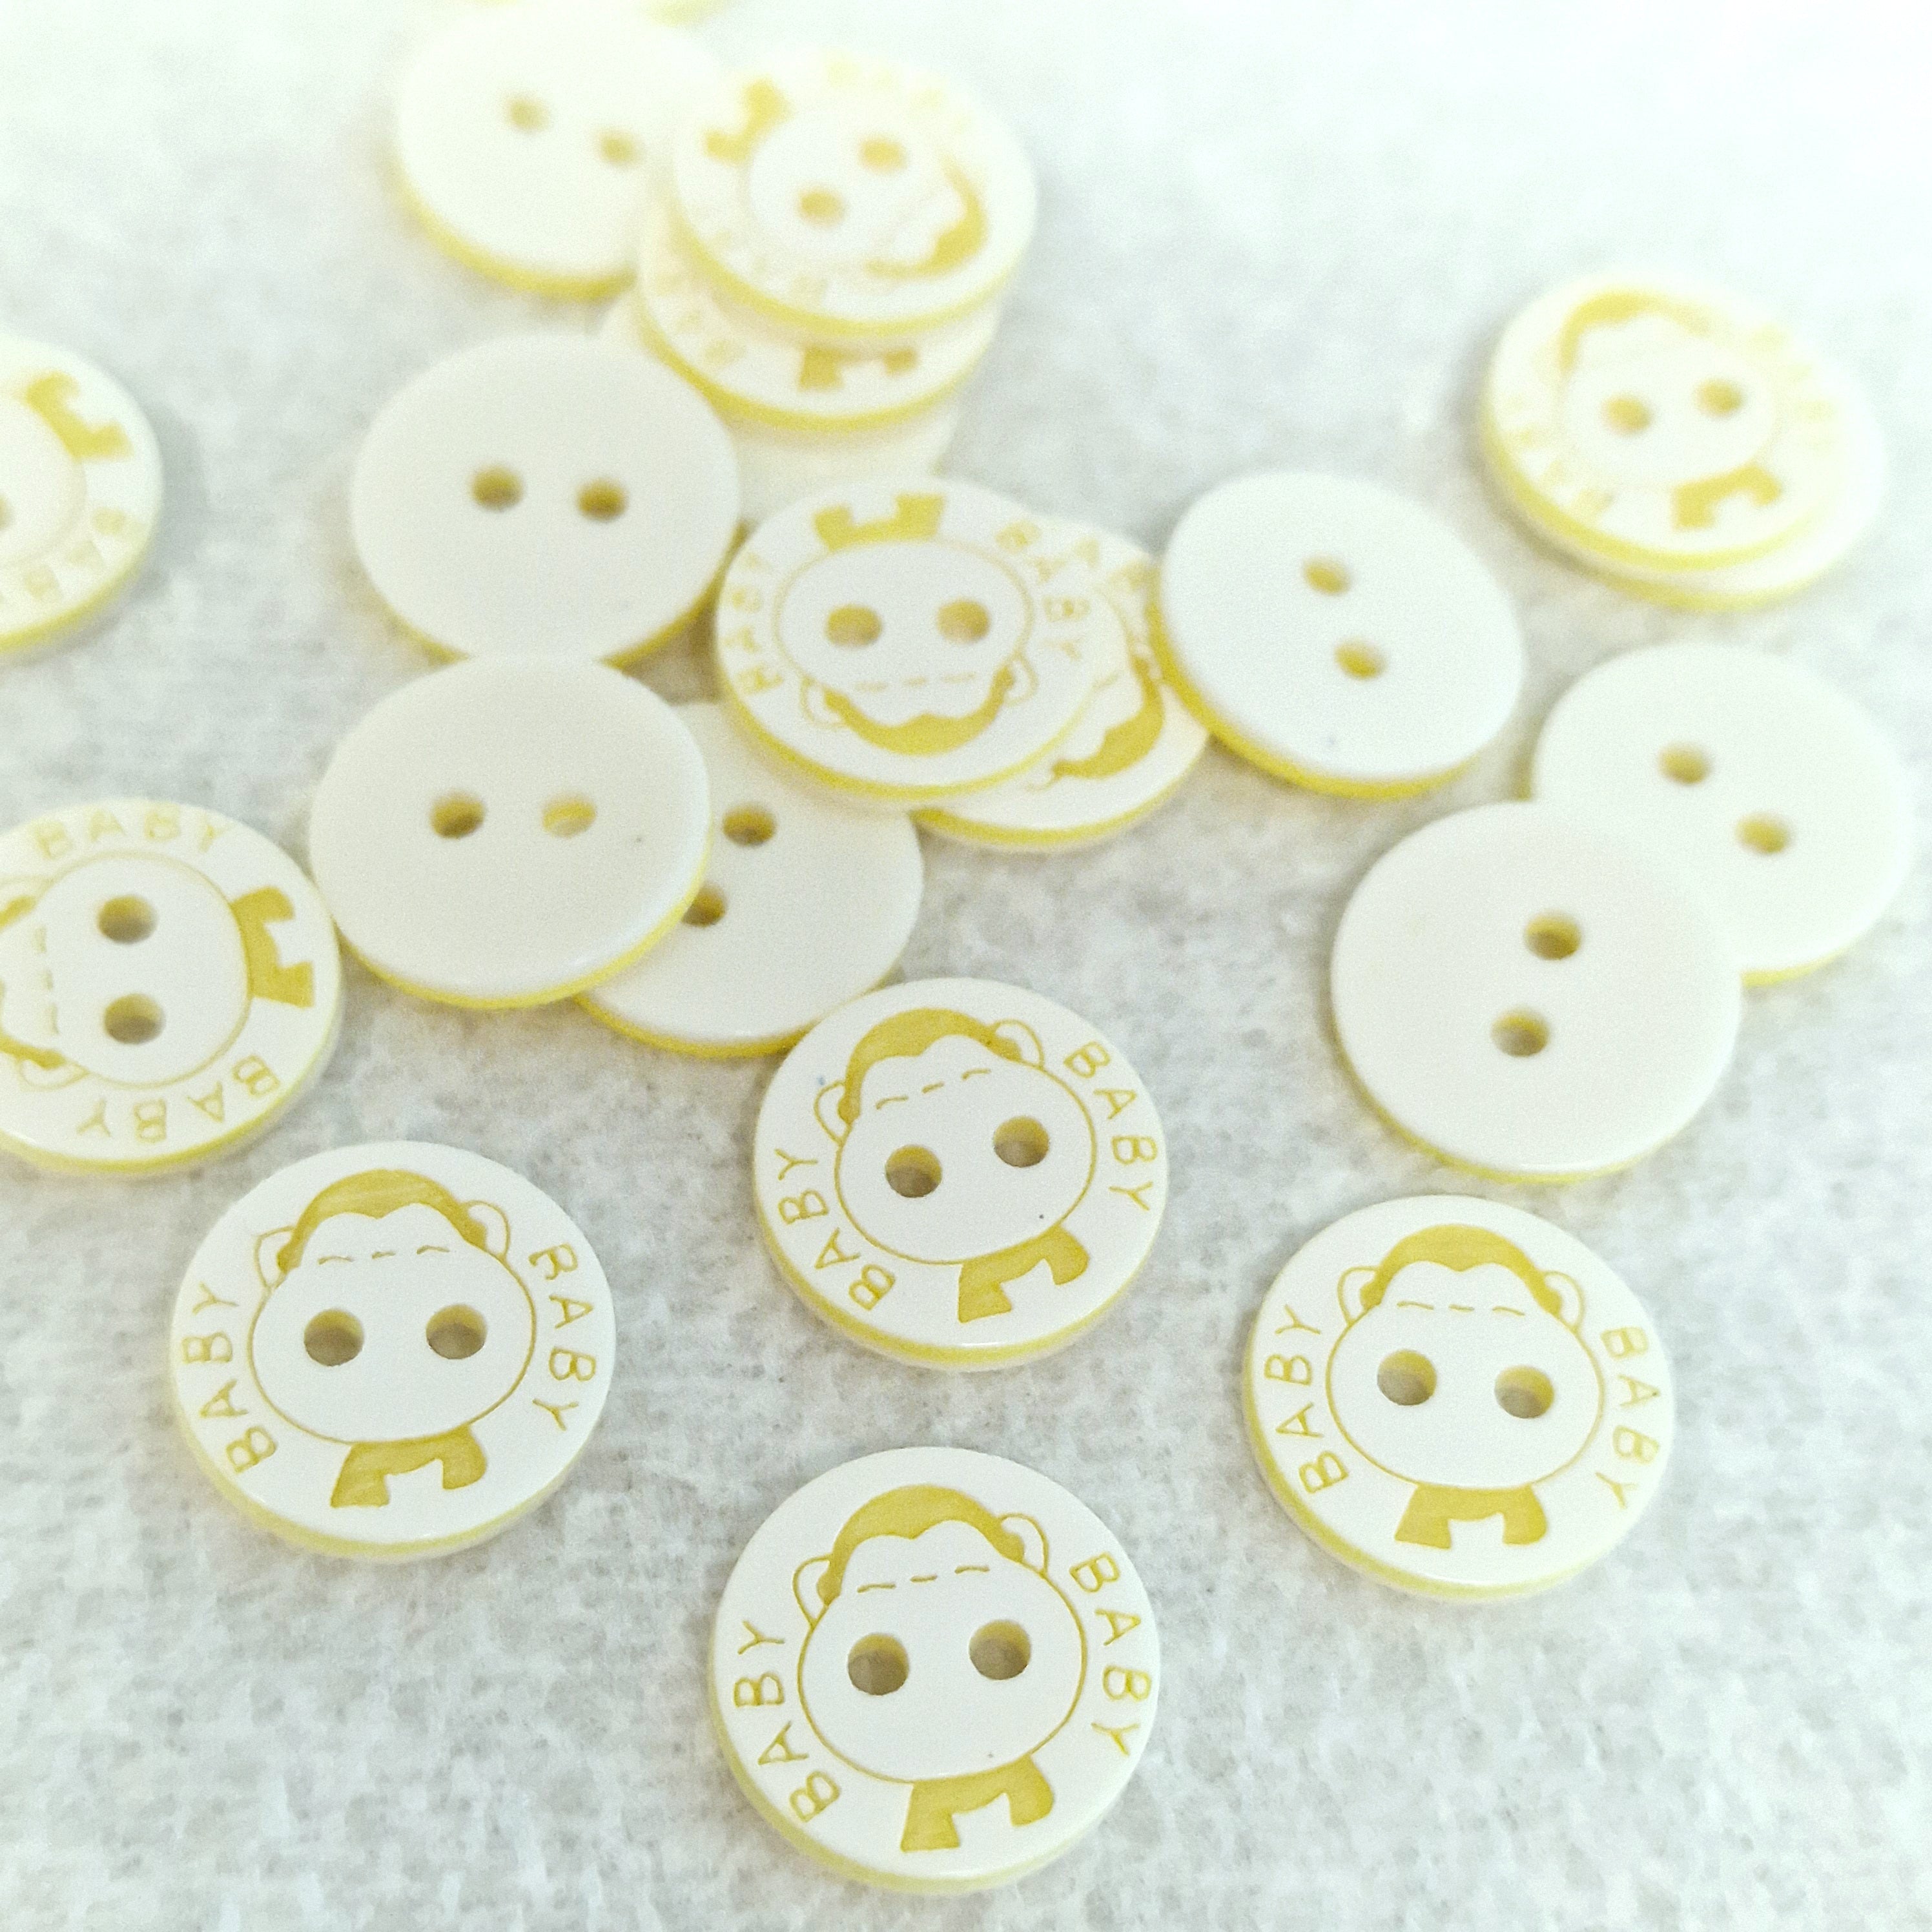 MajorCrafts 48pcs 12.5mm Yellow & White 'Baby' Printed 2 Holes Small Round Resin Sewing Buttons